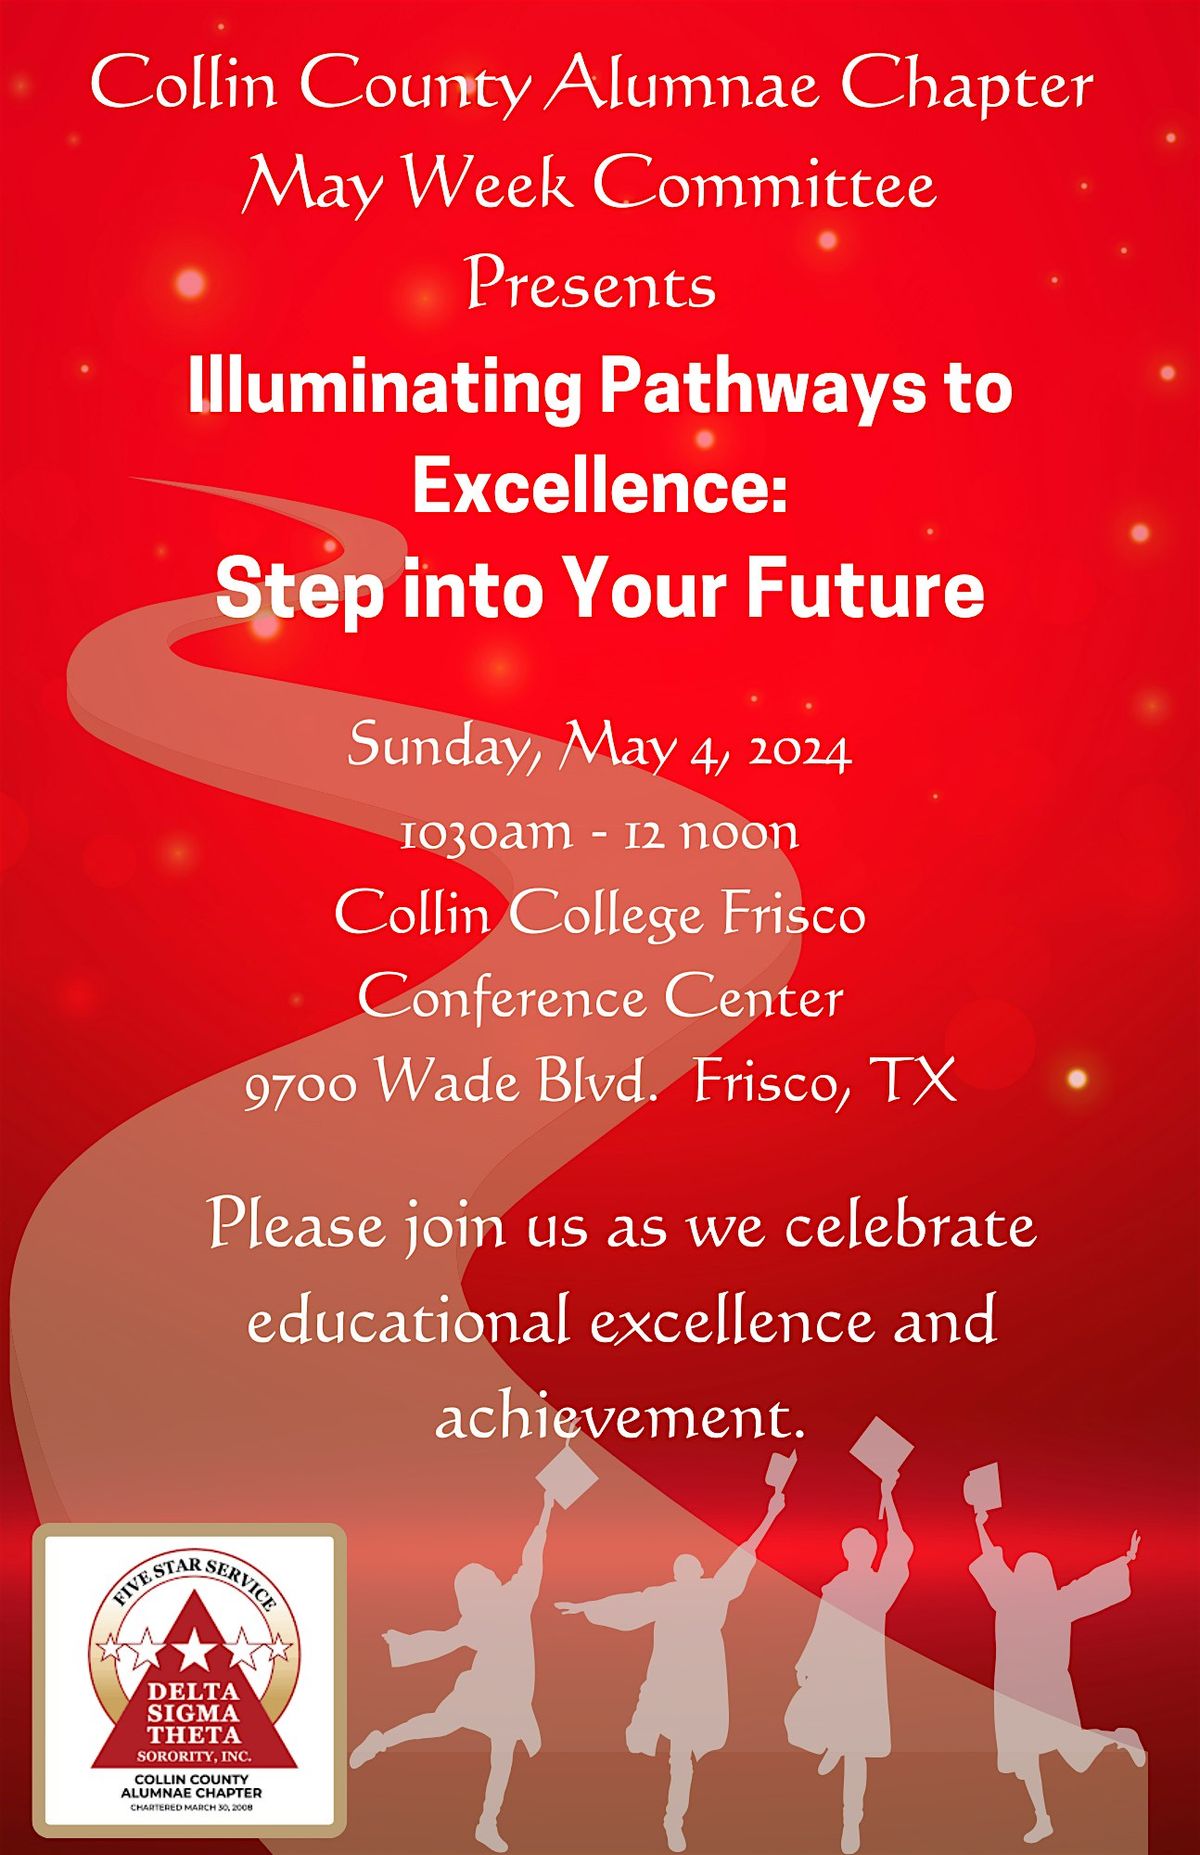 Illuminating Pathways to Excellence: Step into Your Future